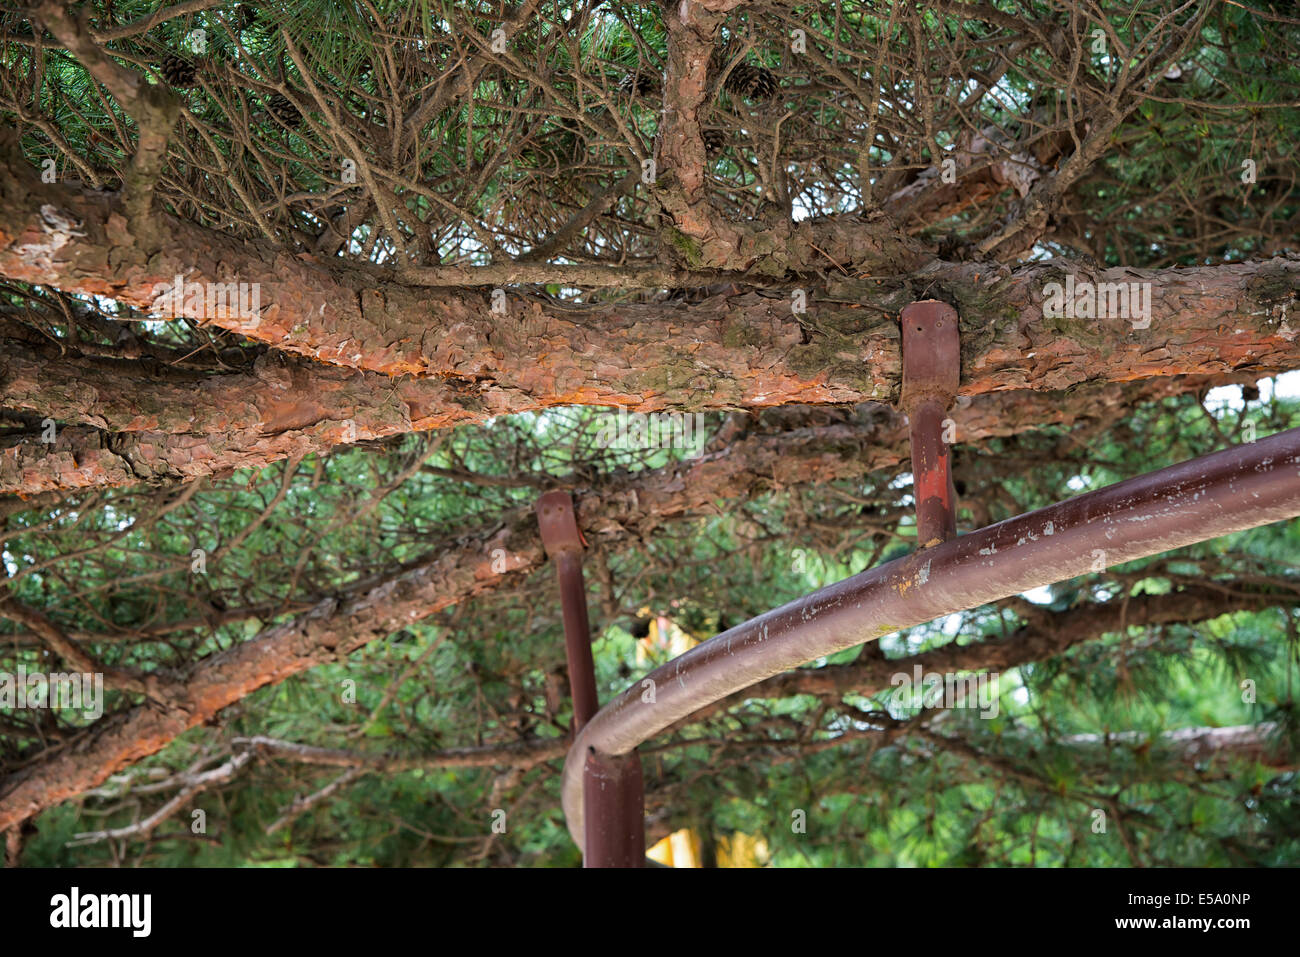 metal structure for supporting branch of large tree Stock Photo